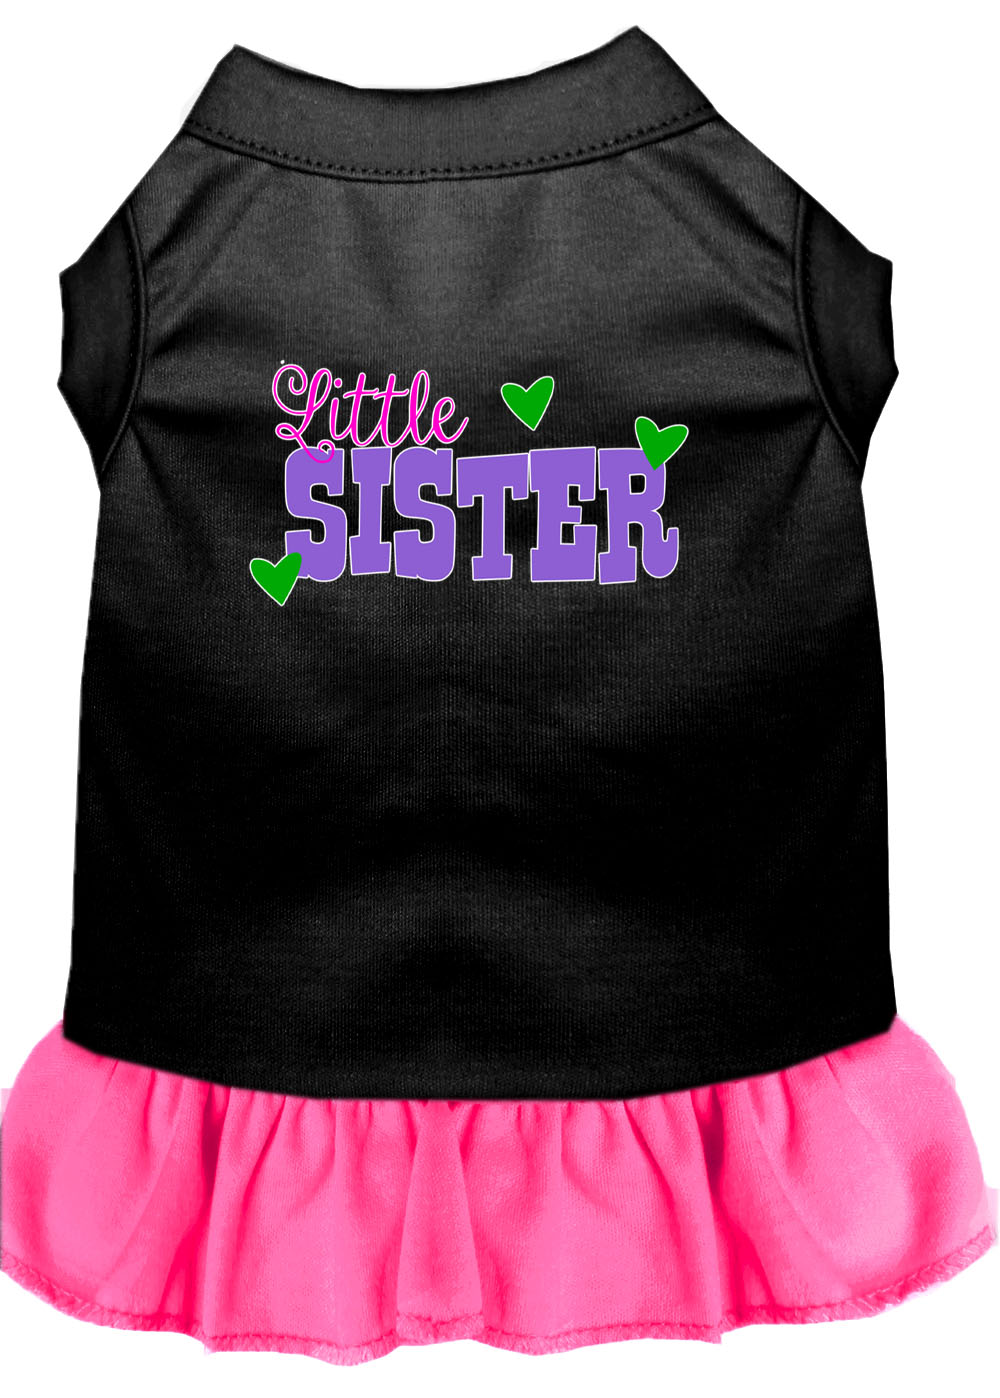 Little Sister Screen Print Dog Dress Black with Bright Pink XL